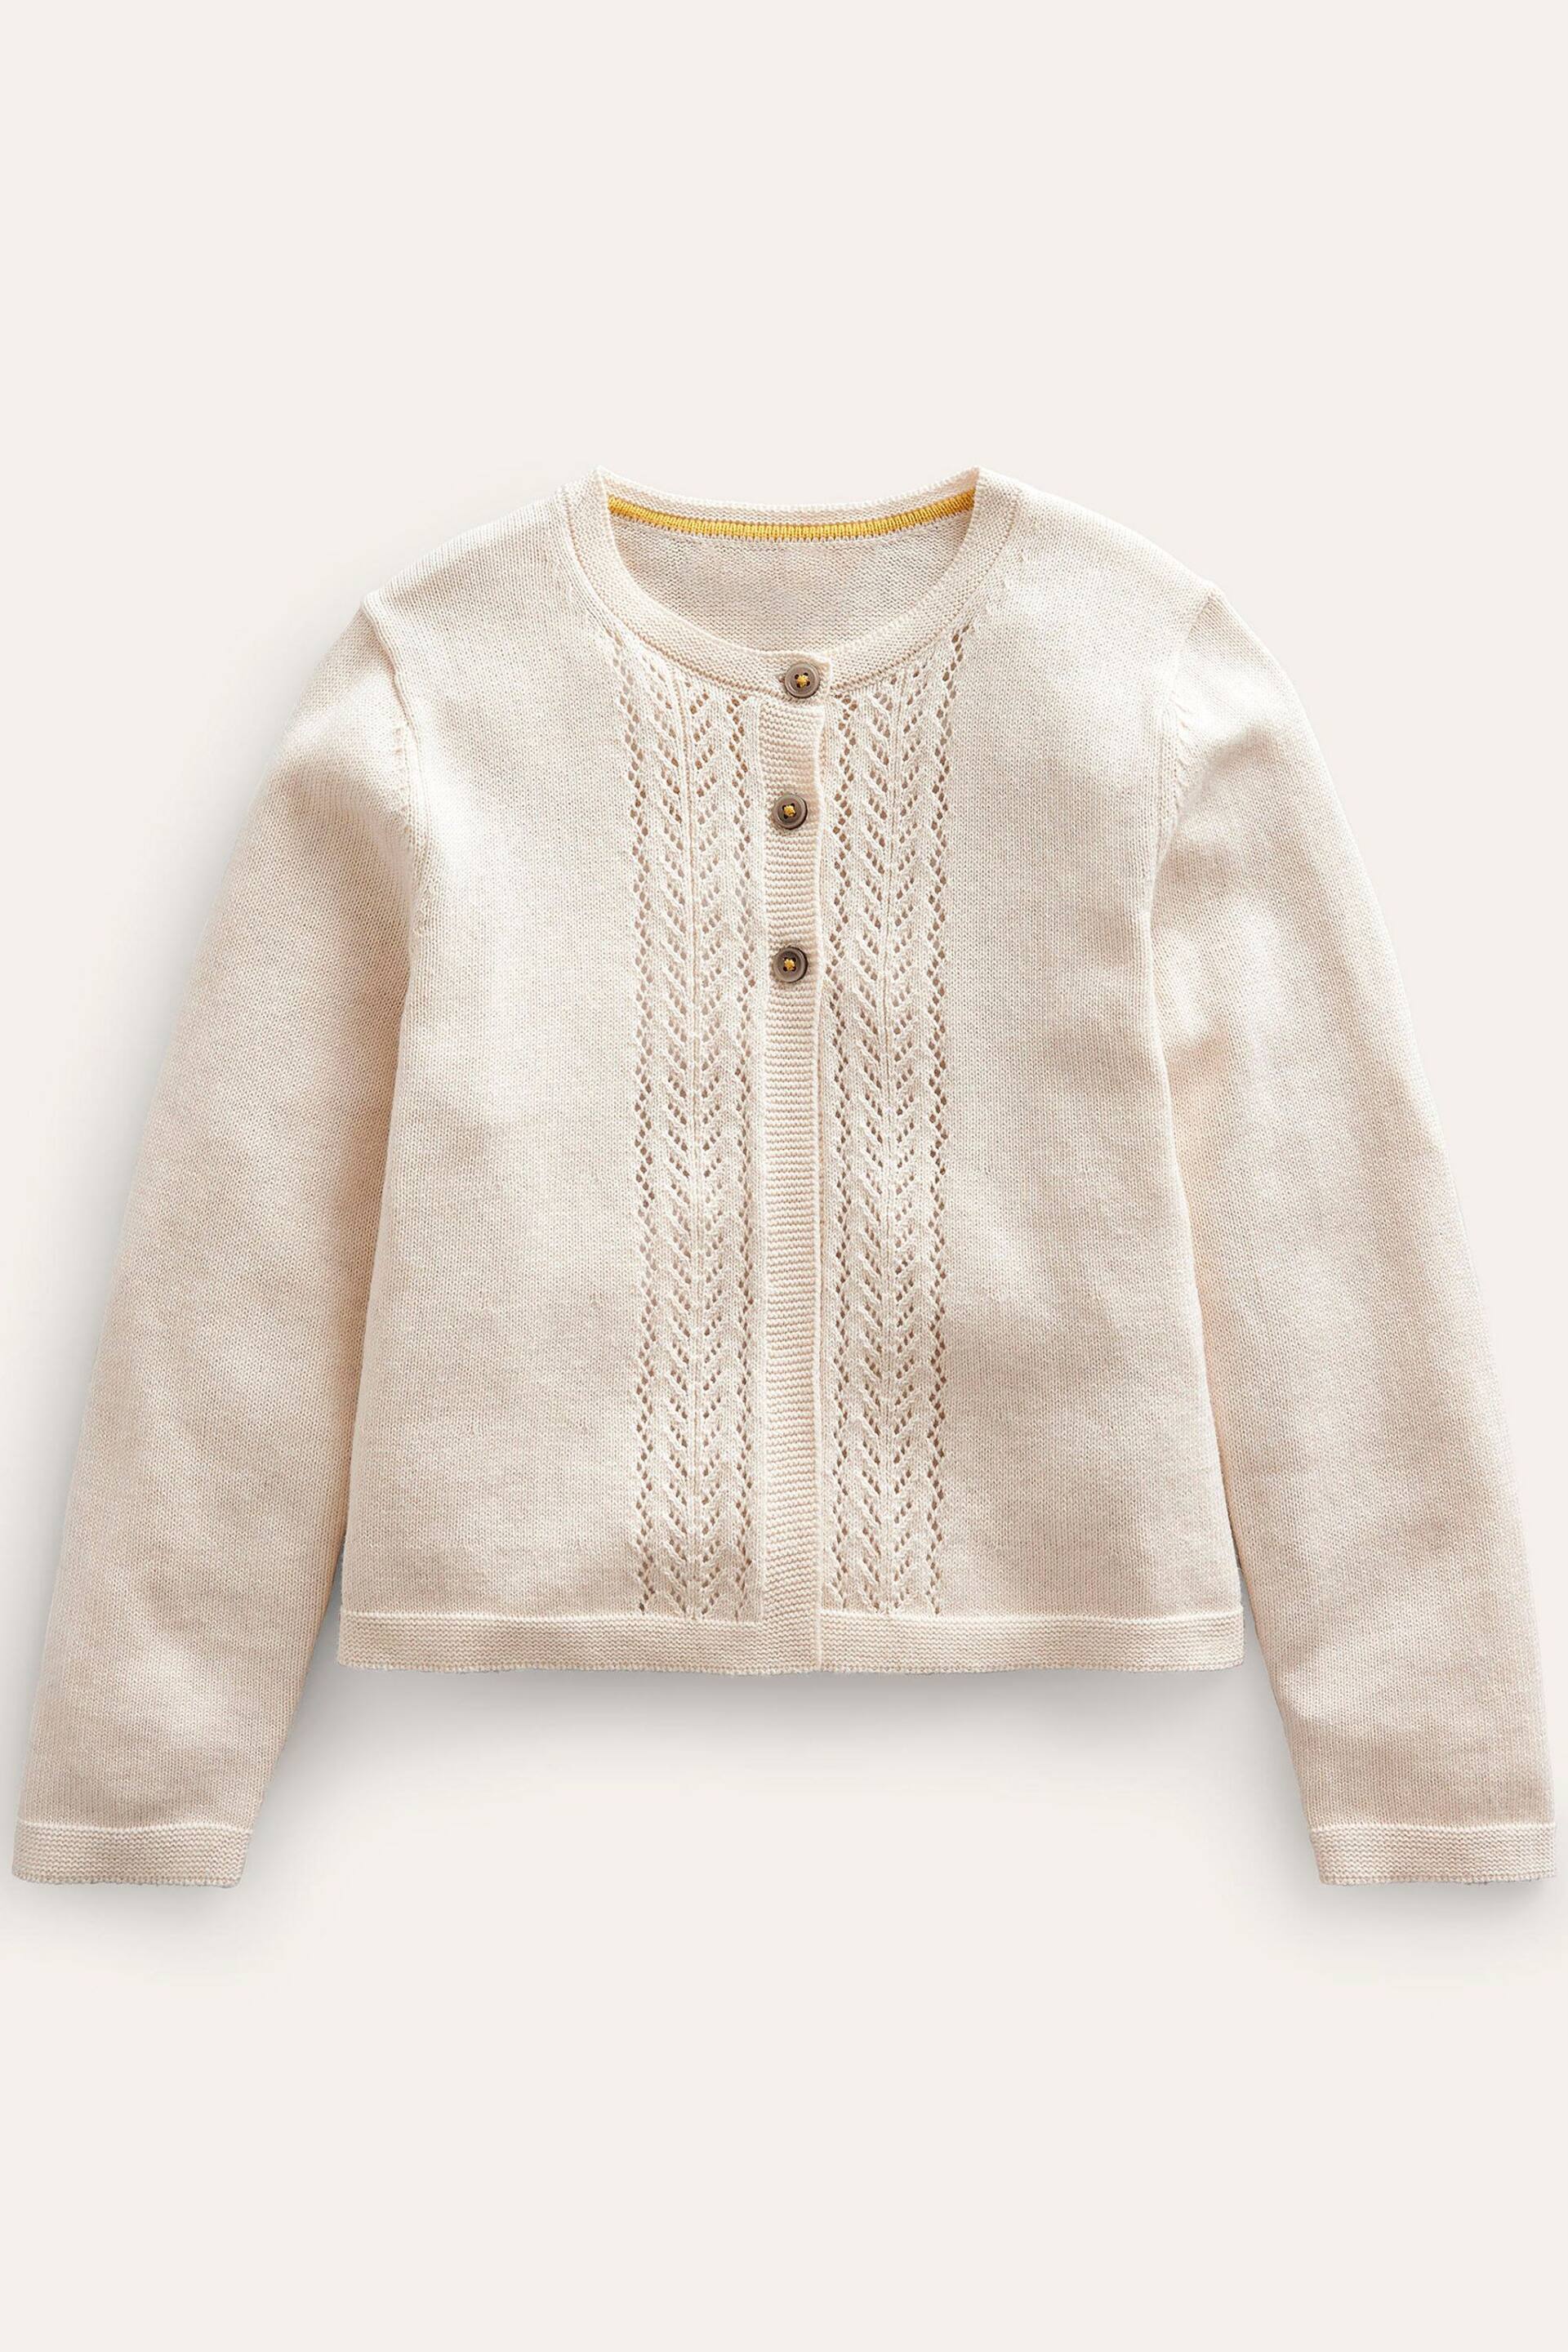 Boden Natural Pointelle Cotton Cardigan - Image 1 of 3